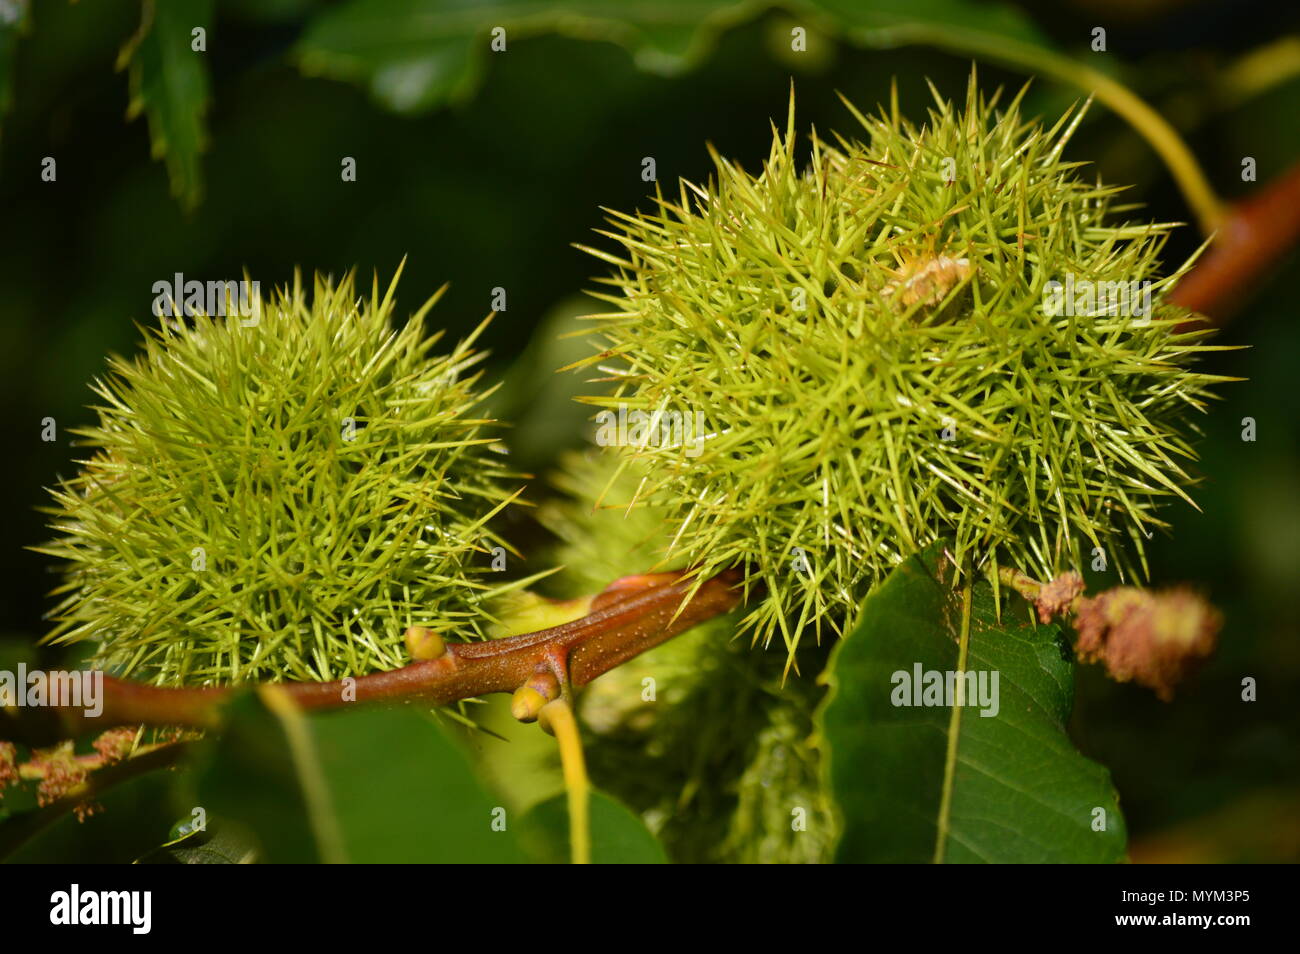 Chestnuts Inside His Thorn In The Birch Meadows In Lugo. Flowers Landscapes Nature. August 18, 2016. Rebedul Becerrea Lugo Galicia Spain. Stock Photo